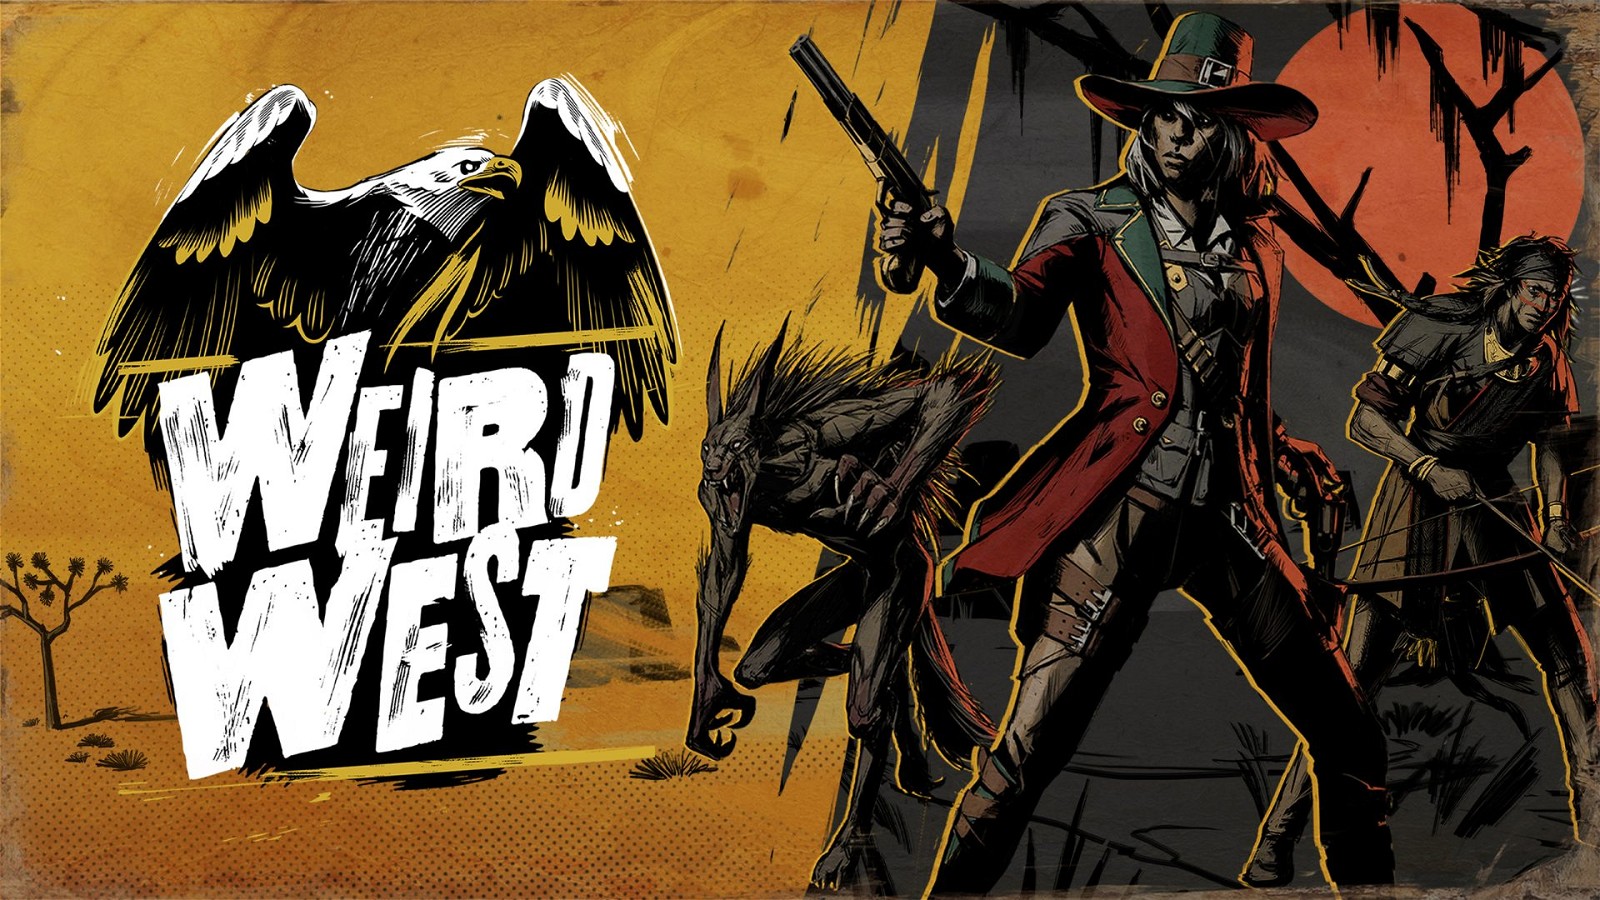 Weird West is the third game in October's PlayStation Plus Lineup.